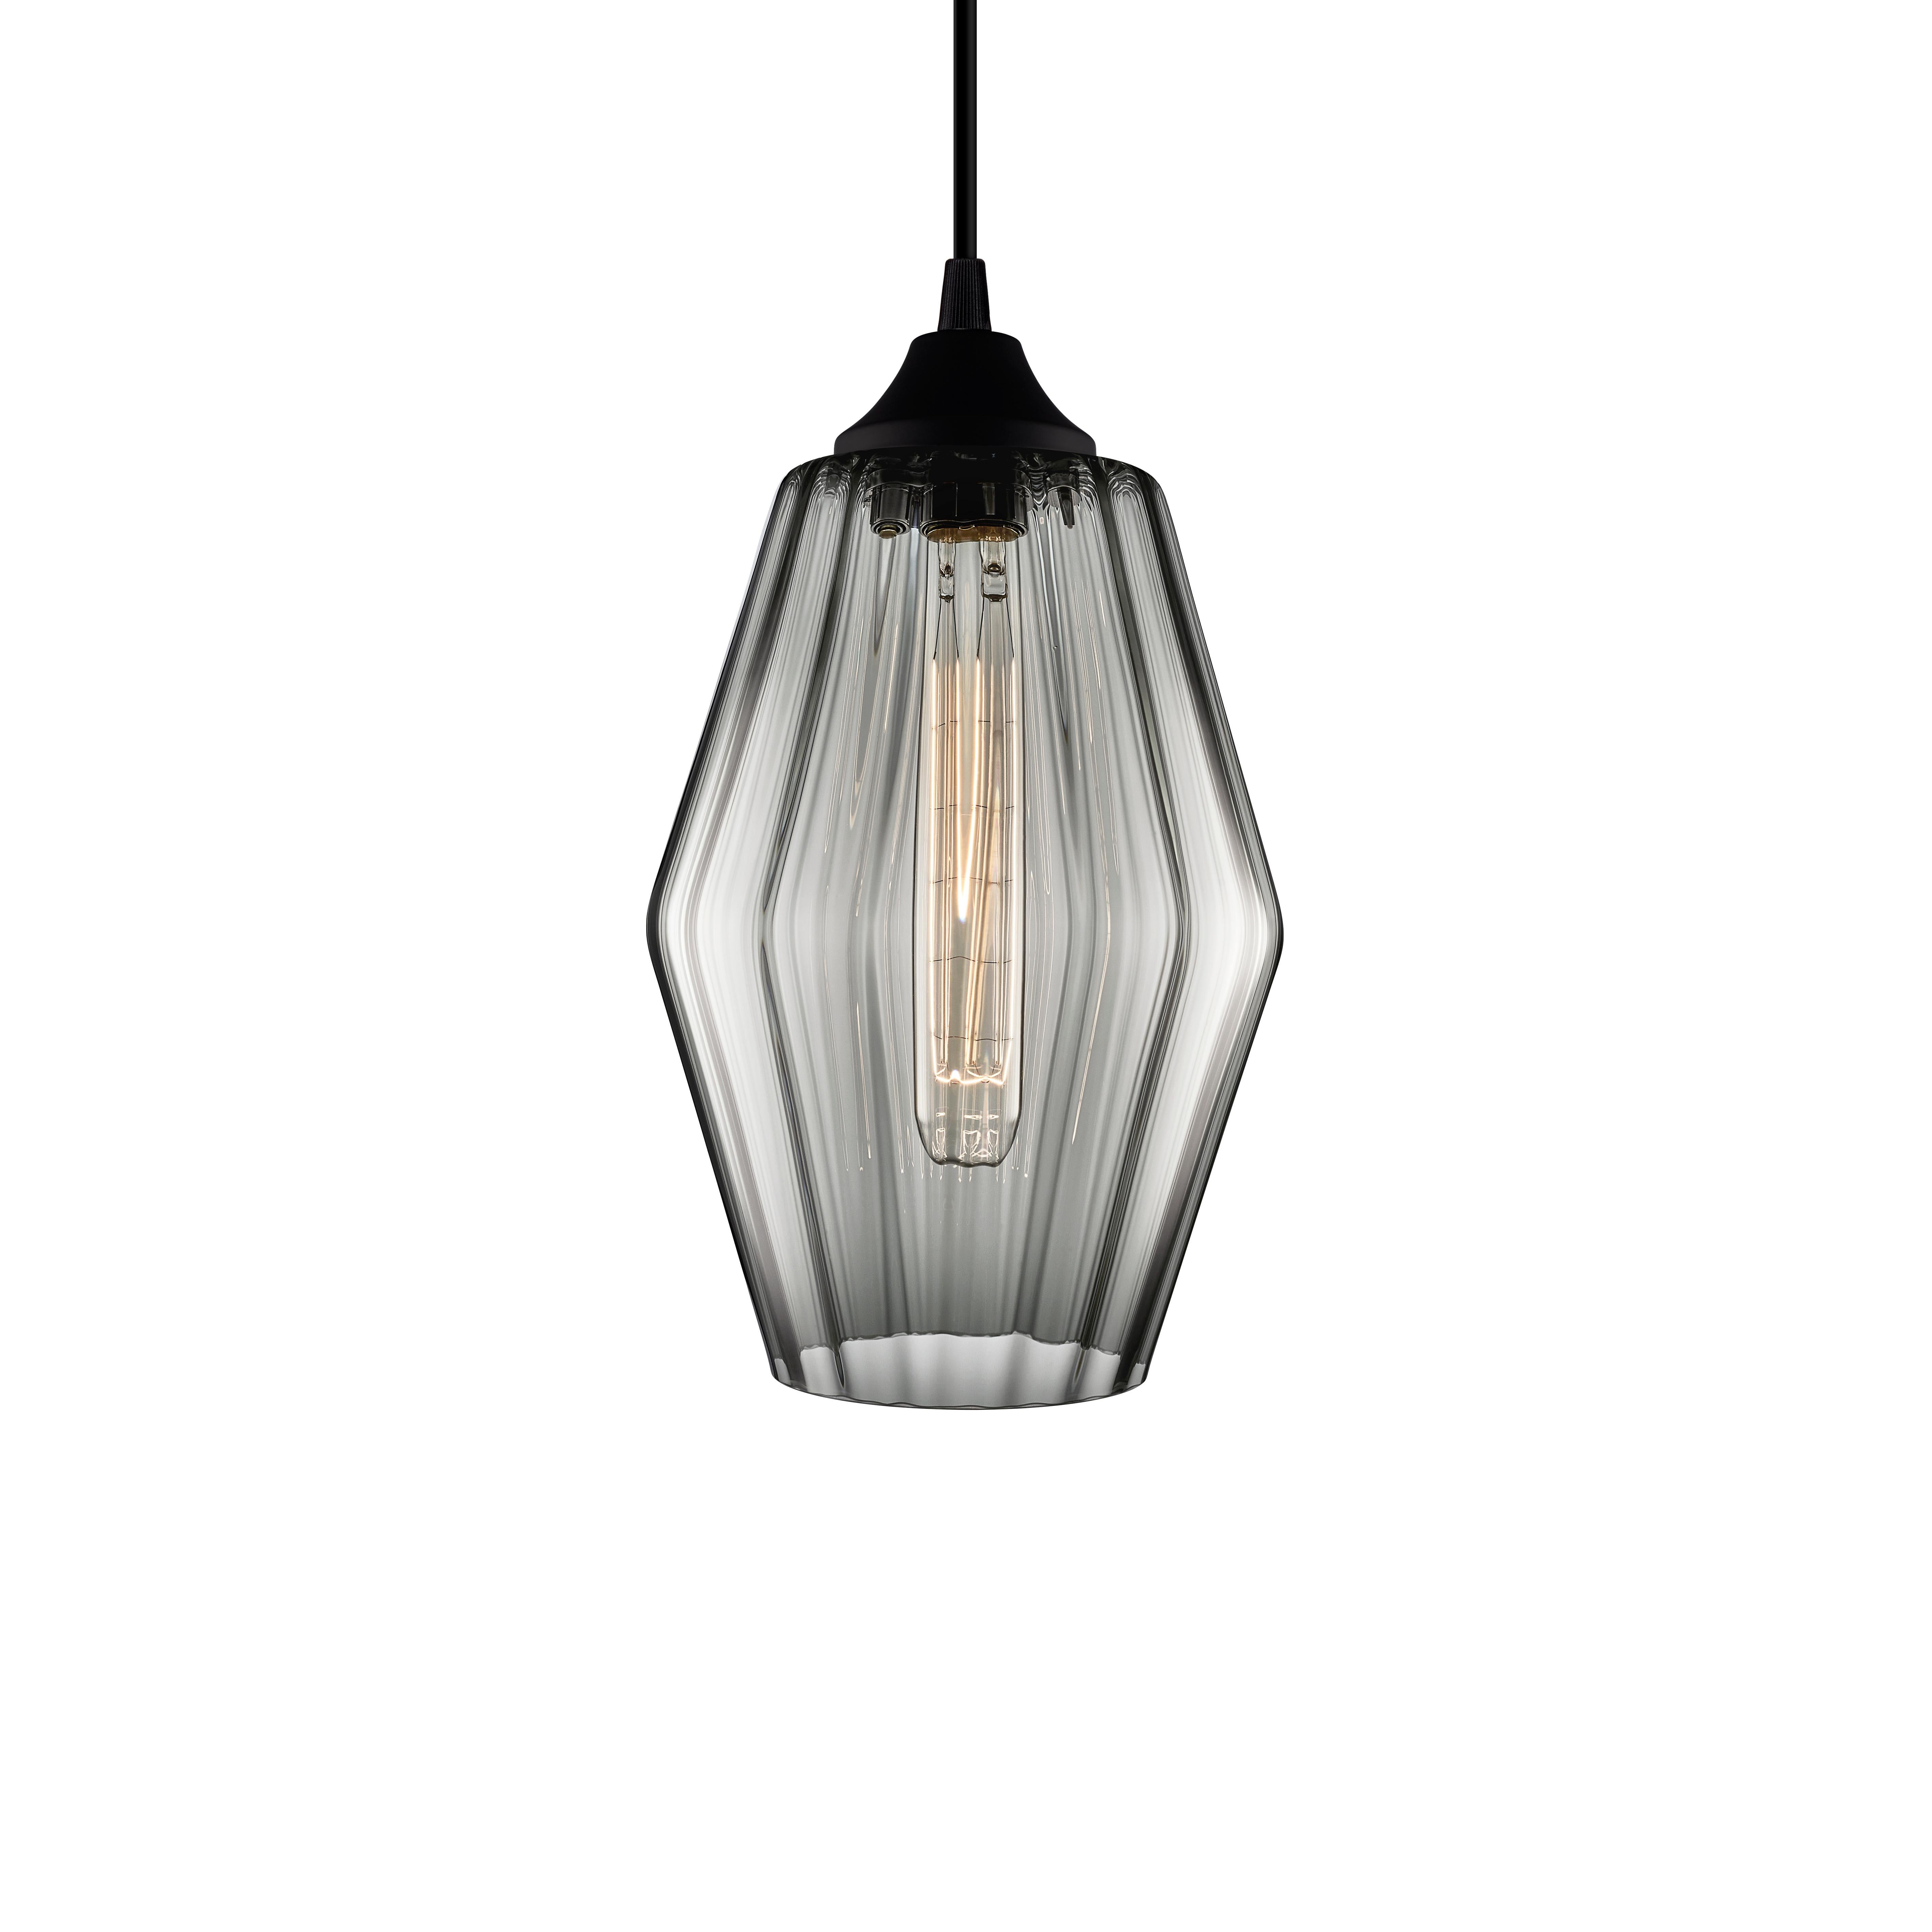 Marquise Petite Crystal Optique Handblown Modern Glass Pendant Light, Made in US In New Condition For Sale In Beacon, NY